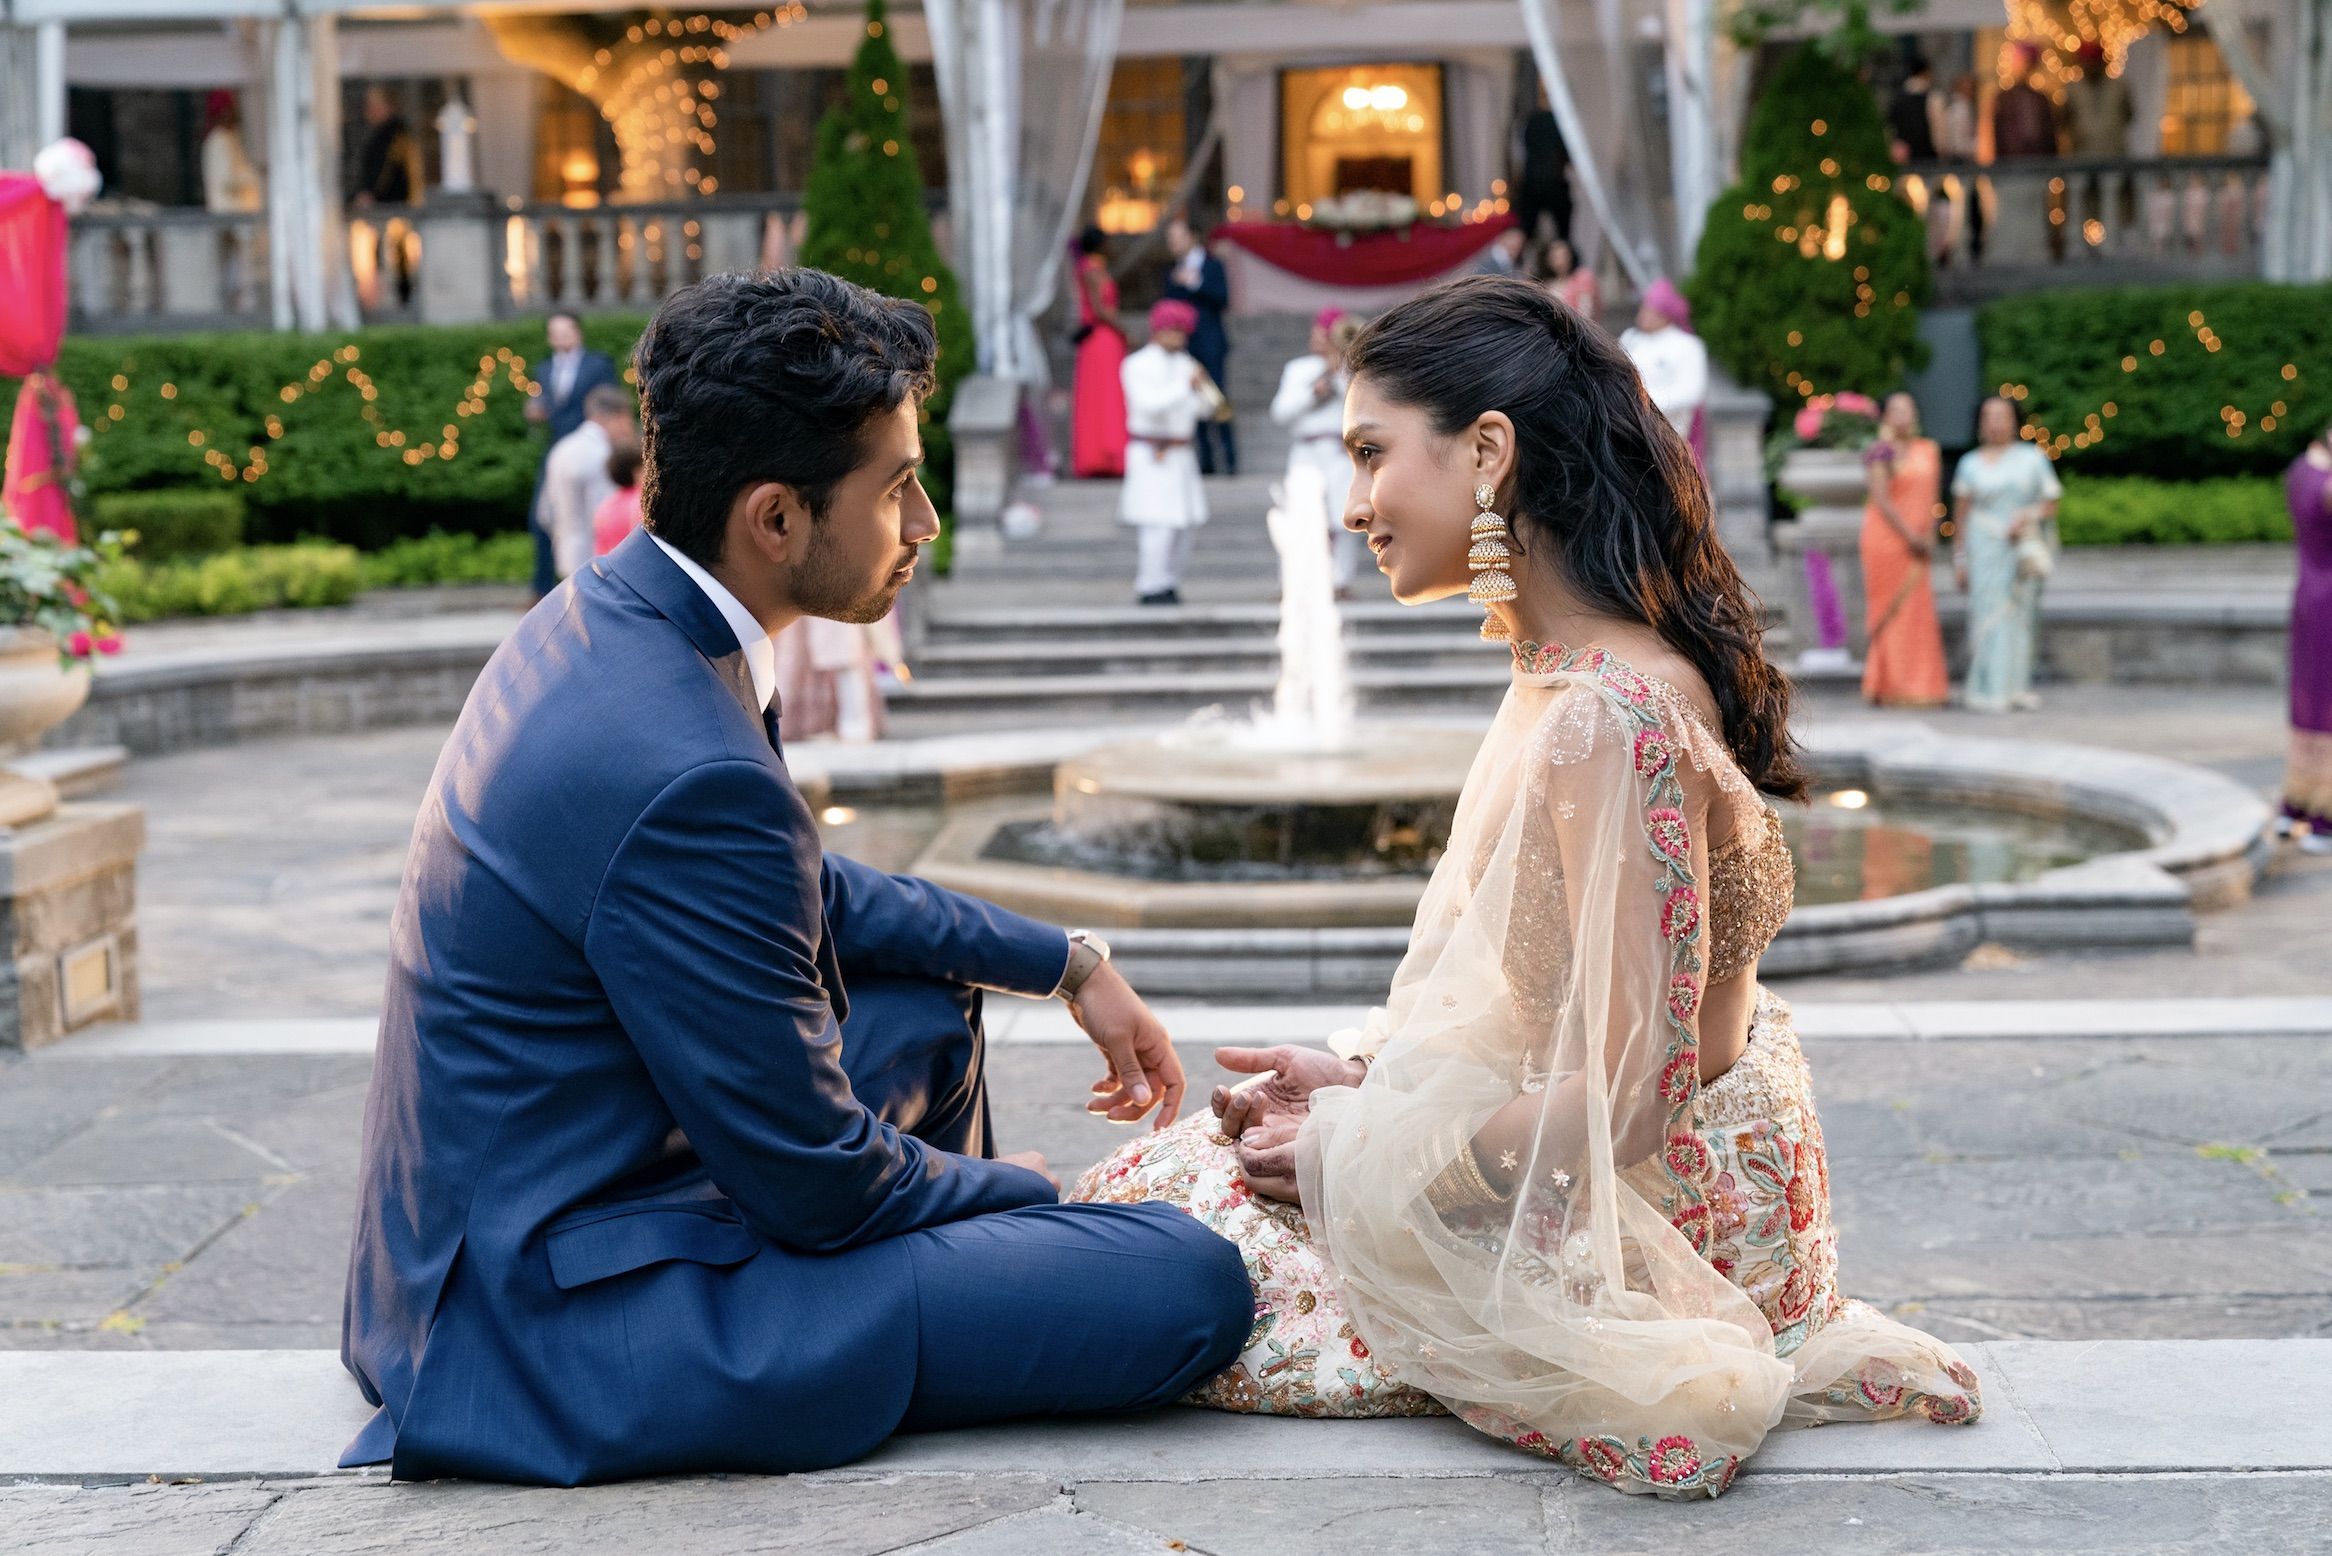 Wedding Season Soundtrack - Every Featured Song in the 2022 Netflix Movie